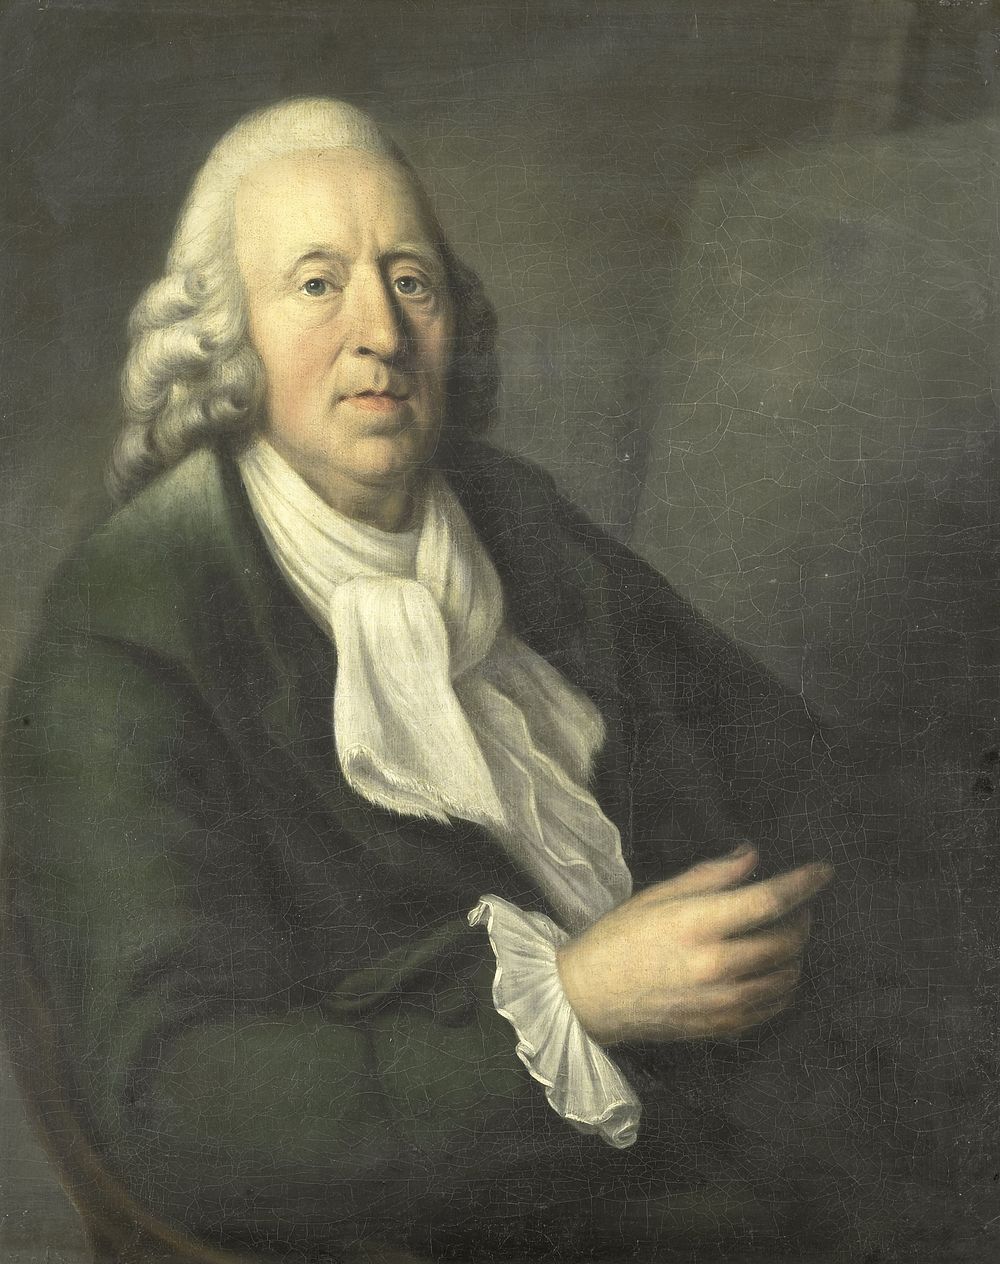 Self Portrait at approximately 60 years of age (1755 - 1769) by Engel Sam